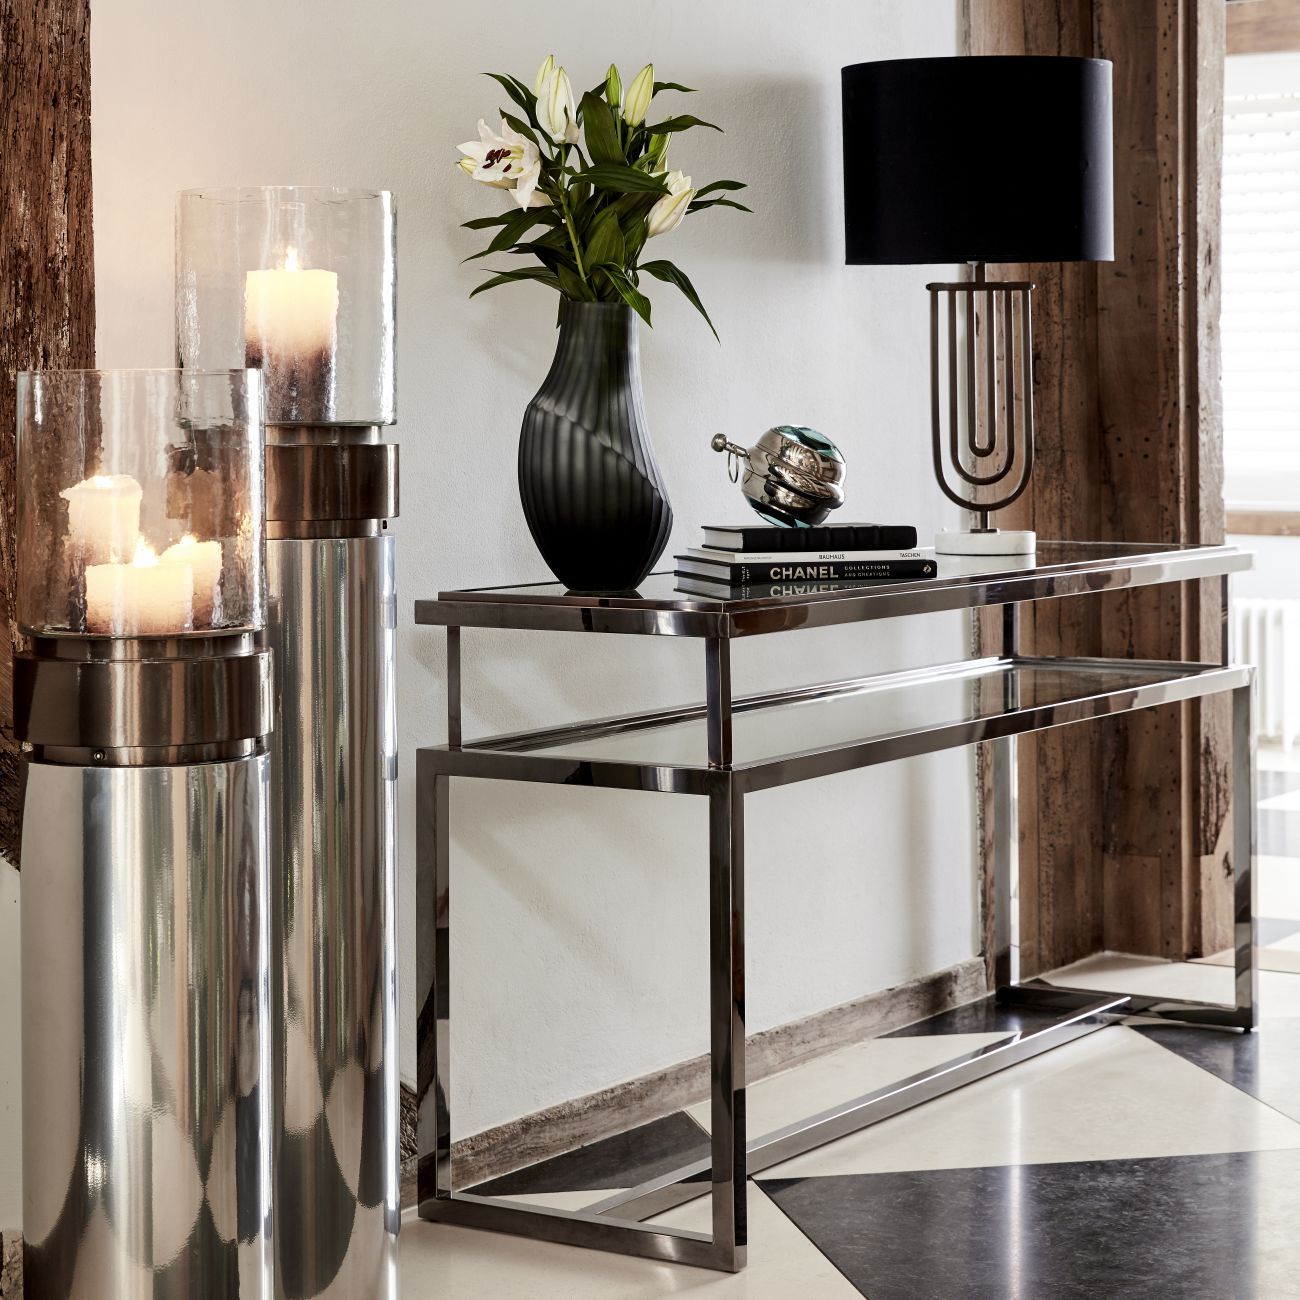 Belgravia Stainless Steel And Glass Console Table 160x45x76cm – The Intended For Glass And Stainless Steel Console Tables (View 11 of 20)